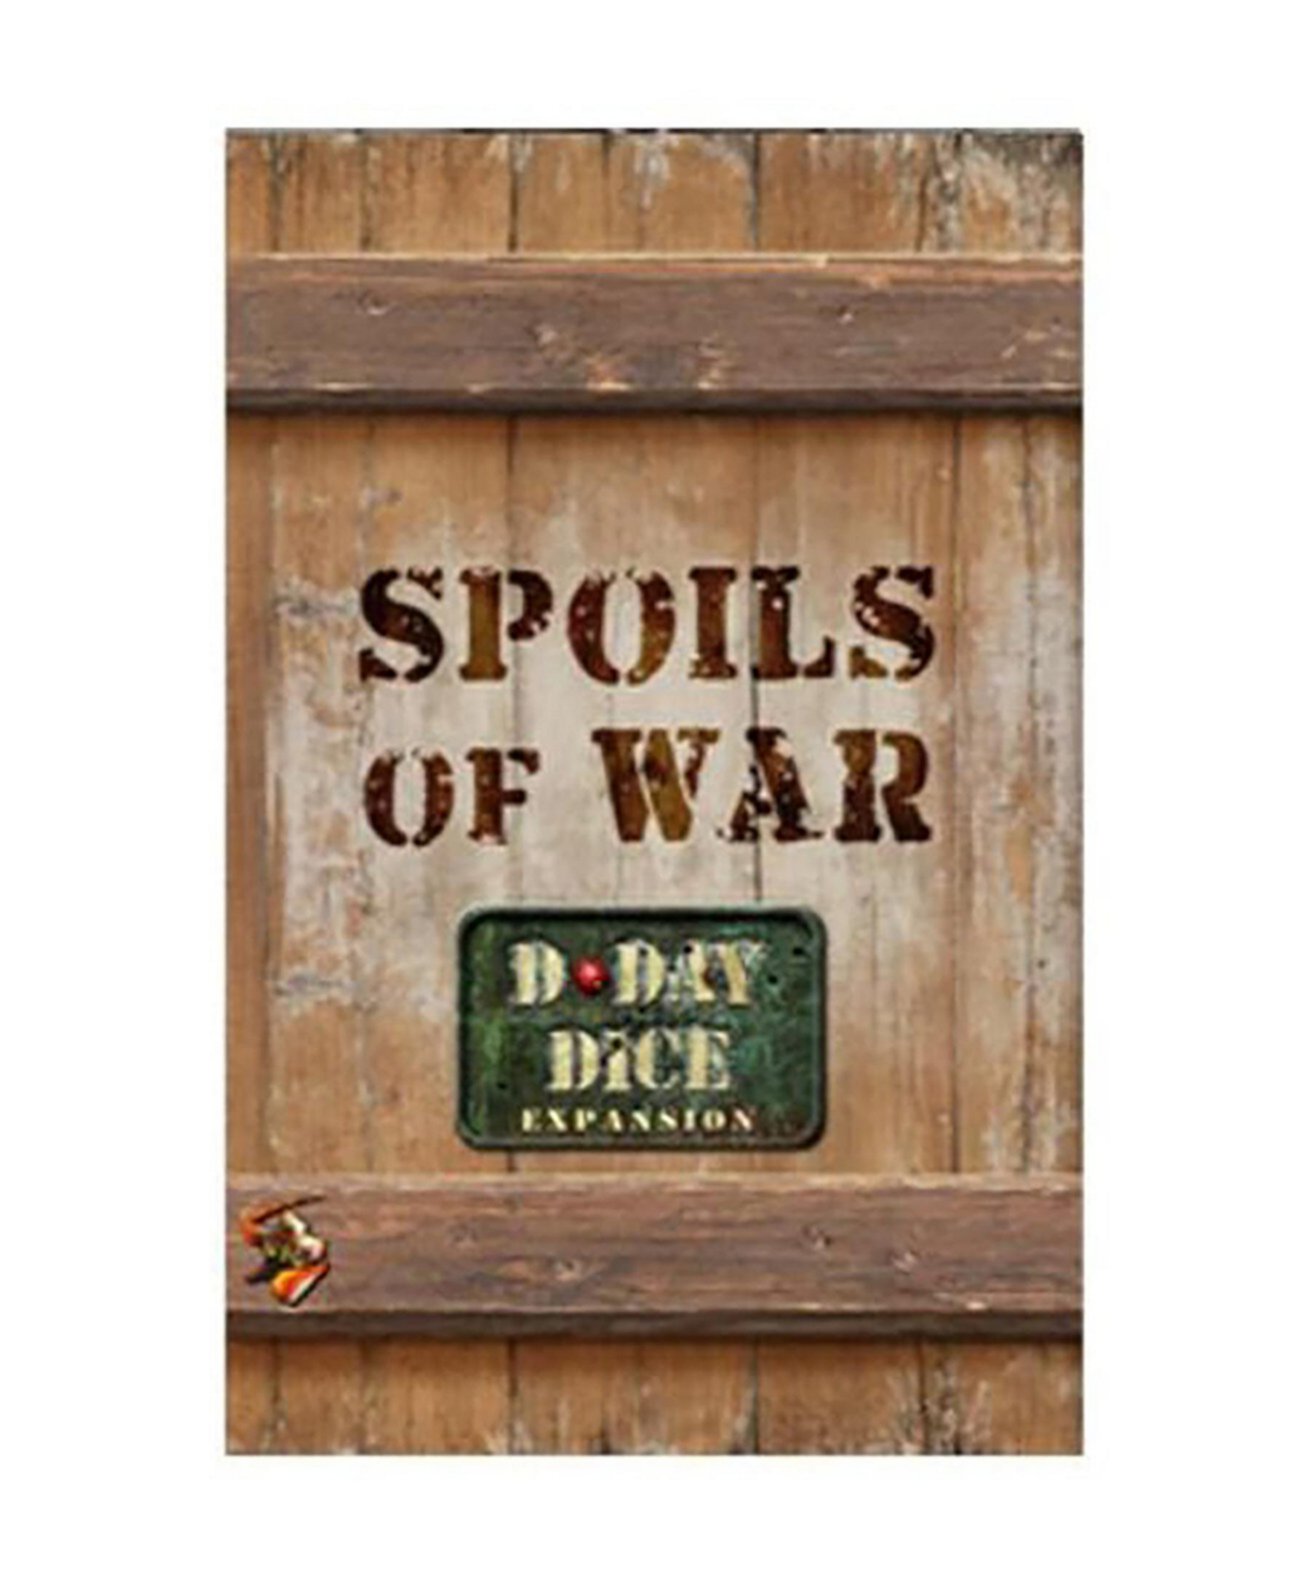 Кости D-Day Dice Spoils of War Expansion Word Forge Games